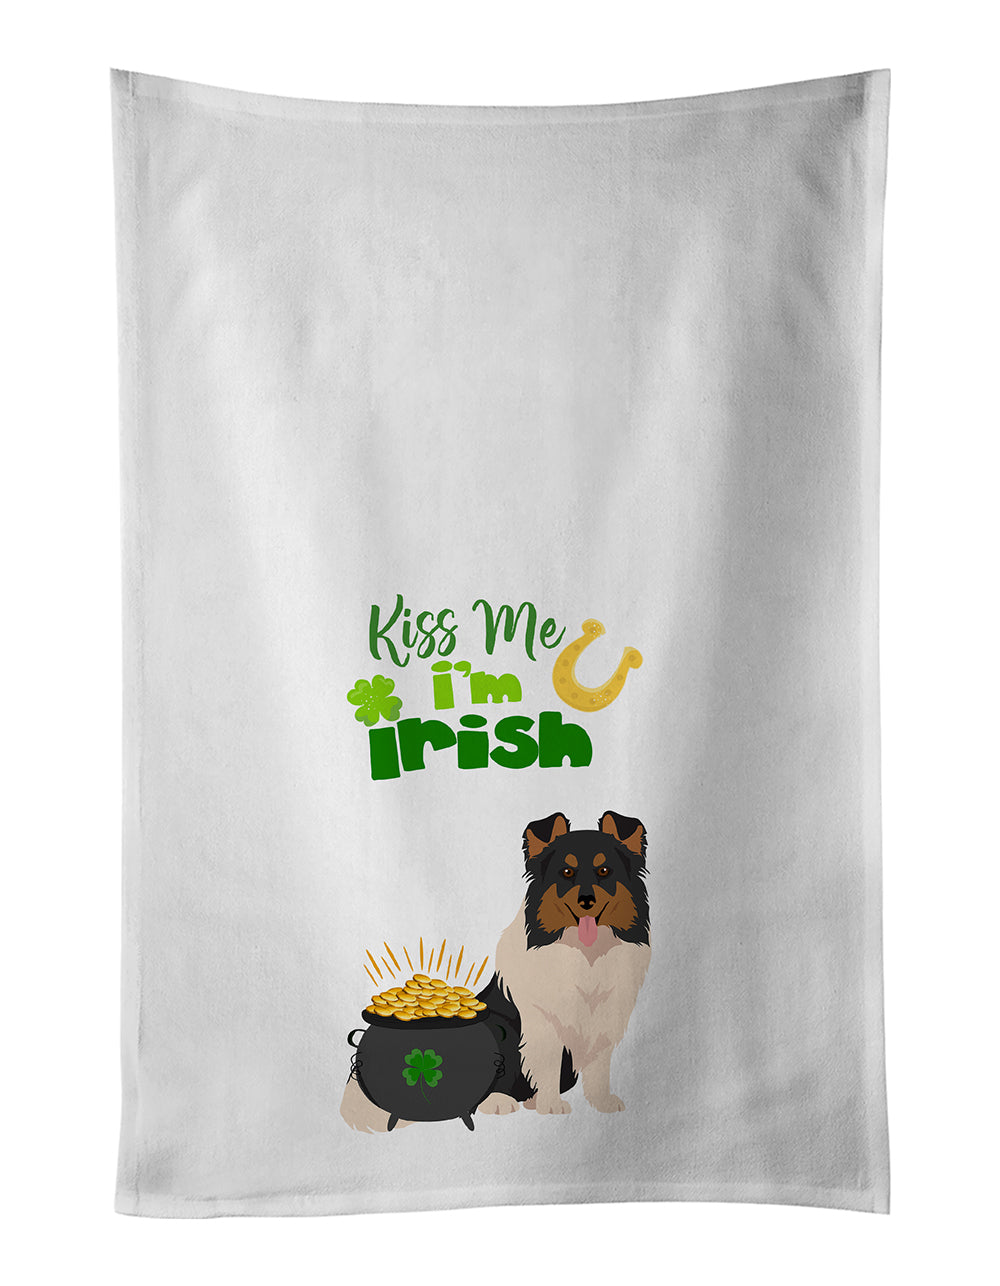 Buy this Tricolor Sheltie St. Patrick's Day White Kitchen Towel Set of 2 Dish Towels